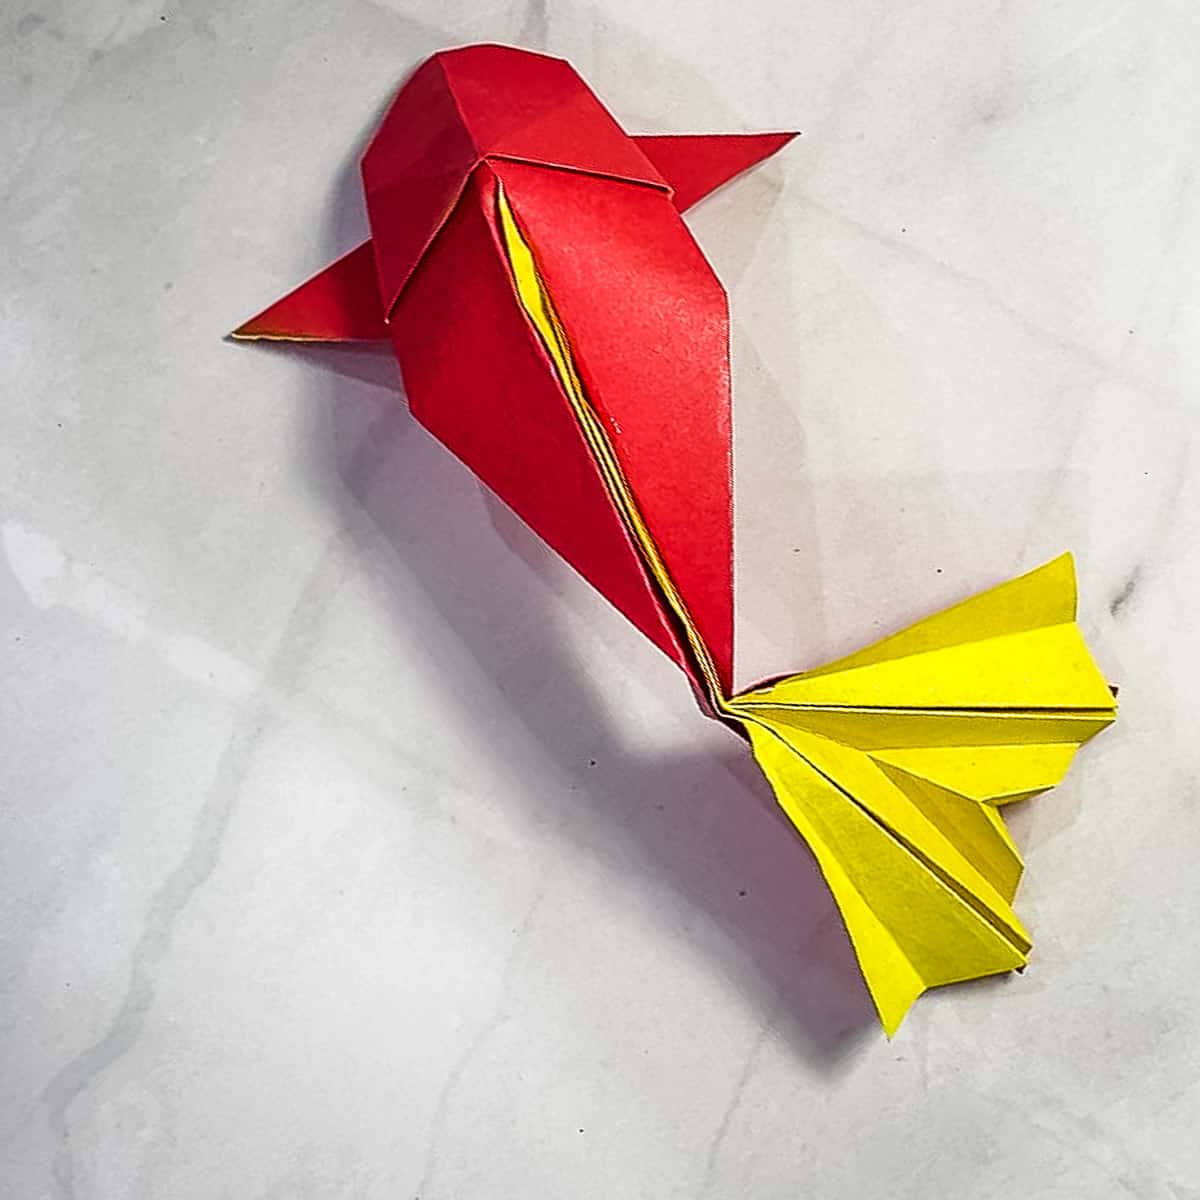 A red and yellow origami koi fish.